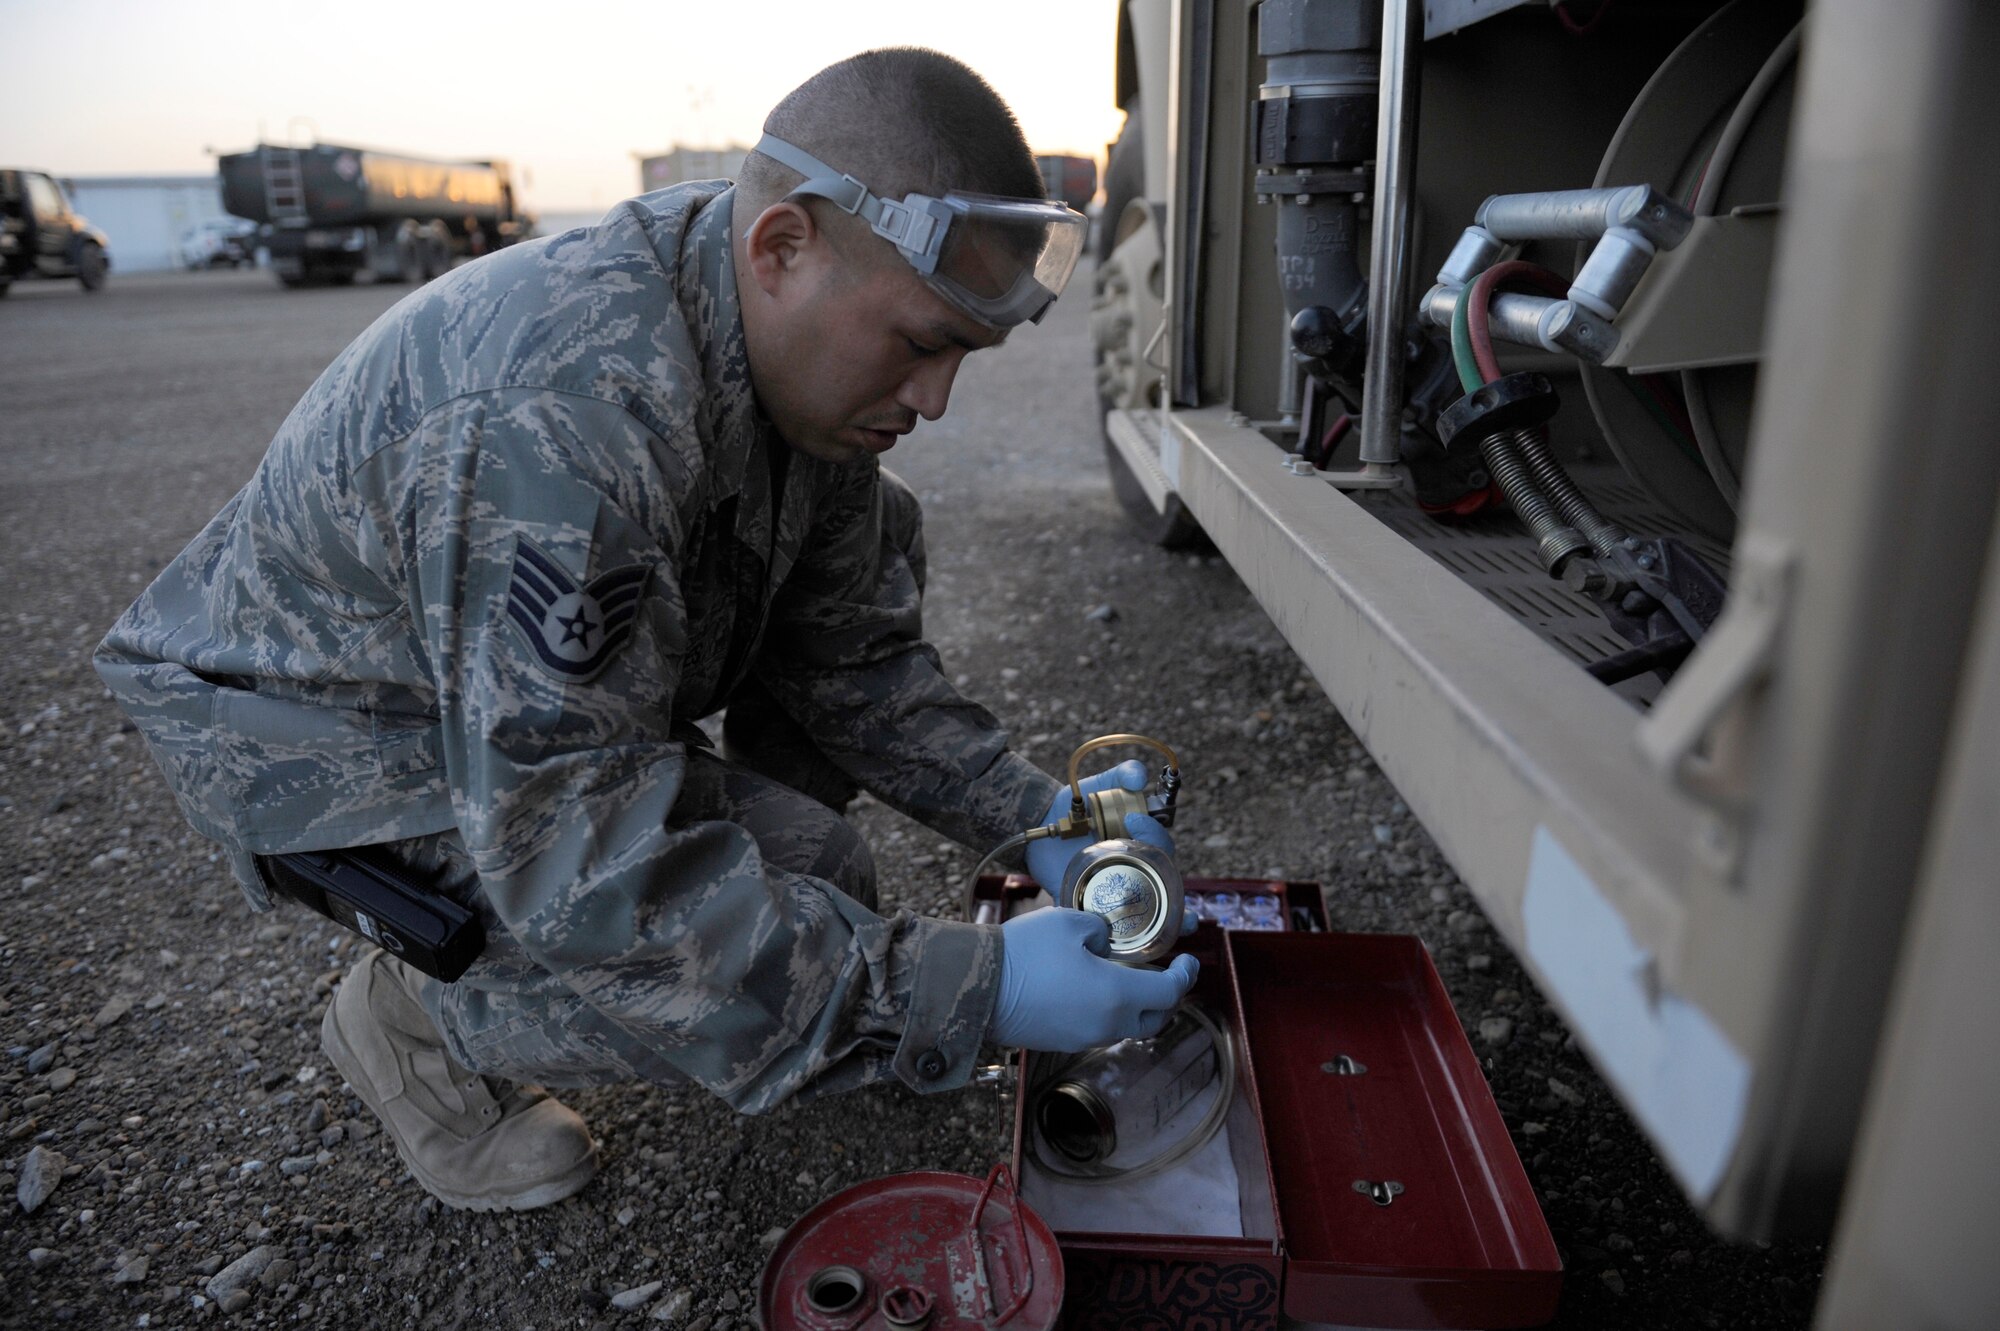 Staff Sgt. Jayson Torres, 380th Expeditionary Logistics Readiness Squadron, fuels lab technician, samples a fuel from an R-11 fuel truck for solids and water, April 4 at an undisclosed location in Southwest Asia. Sergeant Torres is deployed from Eglin AFB, Fla. and hails from Lubbock, Texas. (U.S. Air Force photo by Senior Airman Brian J. Ellis) (Released)